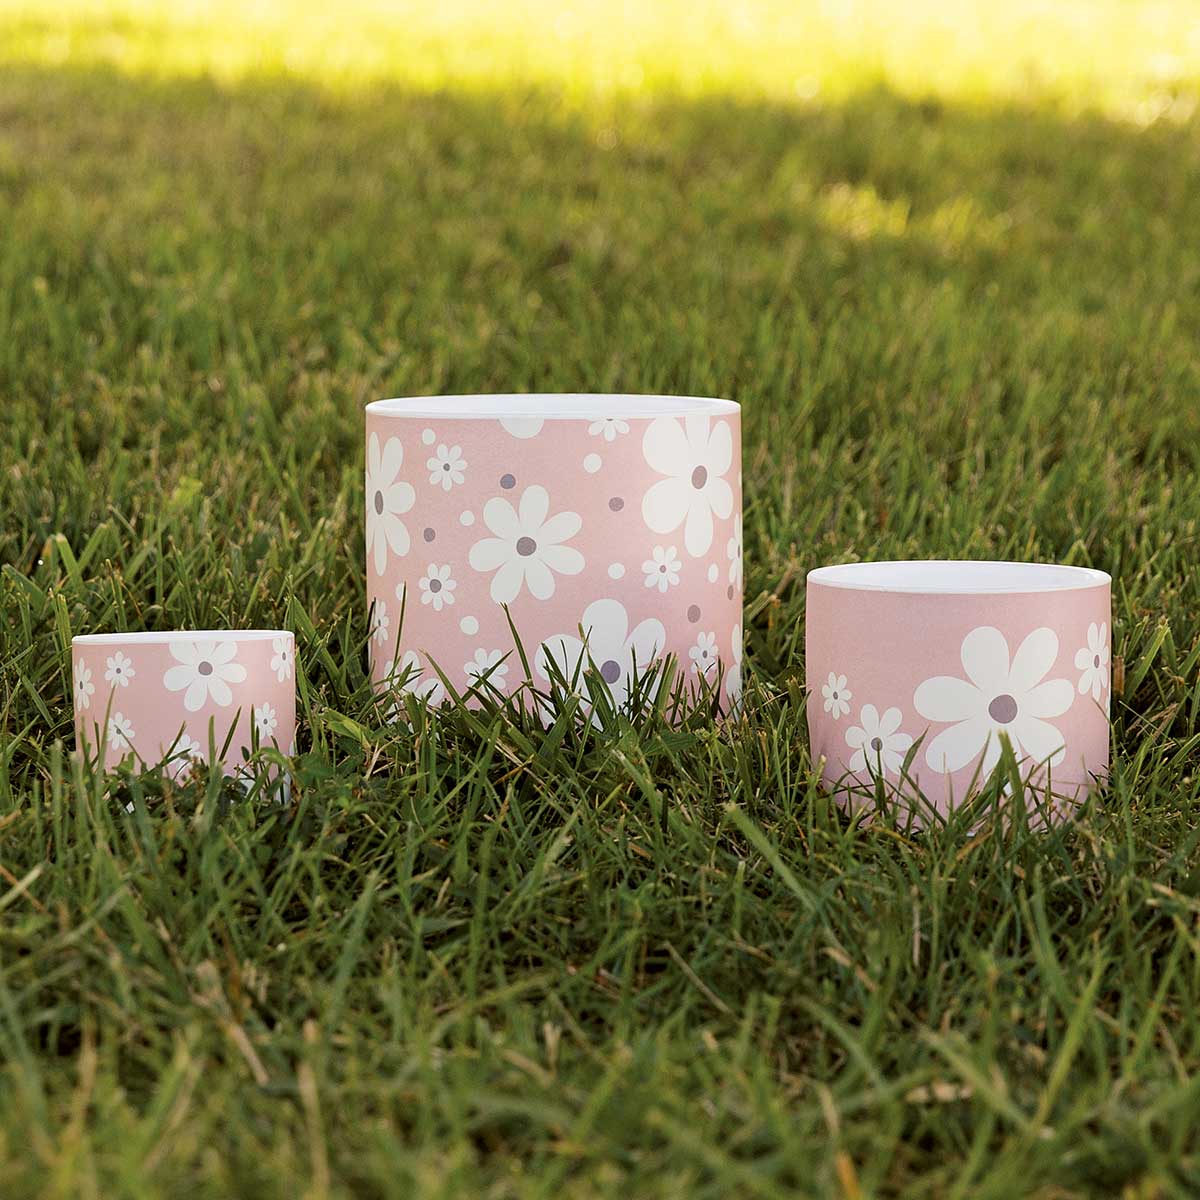 b50 POT WHOOPSIE DAISY LARGE 5.25IN X 4.75IN PINK/WHITE CERAMIC